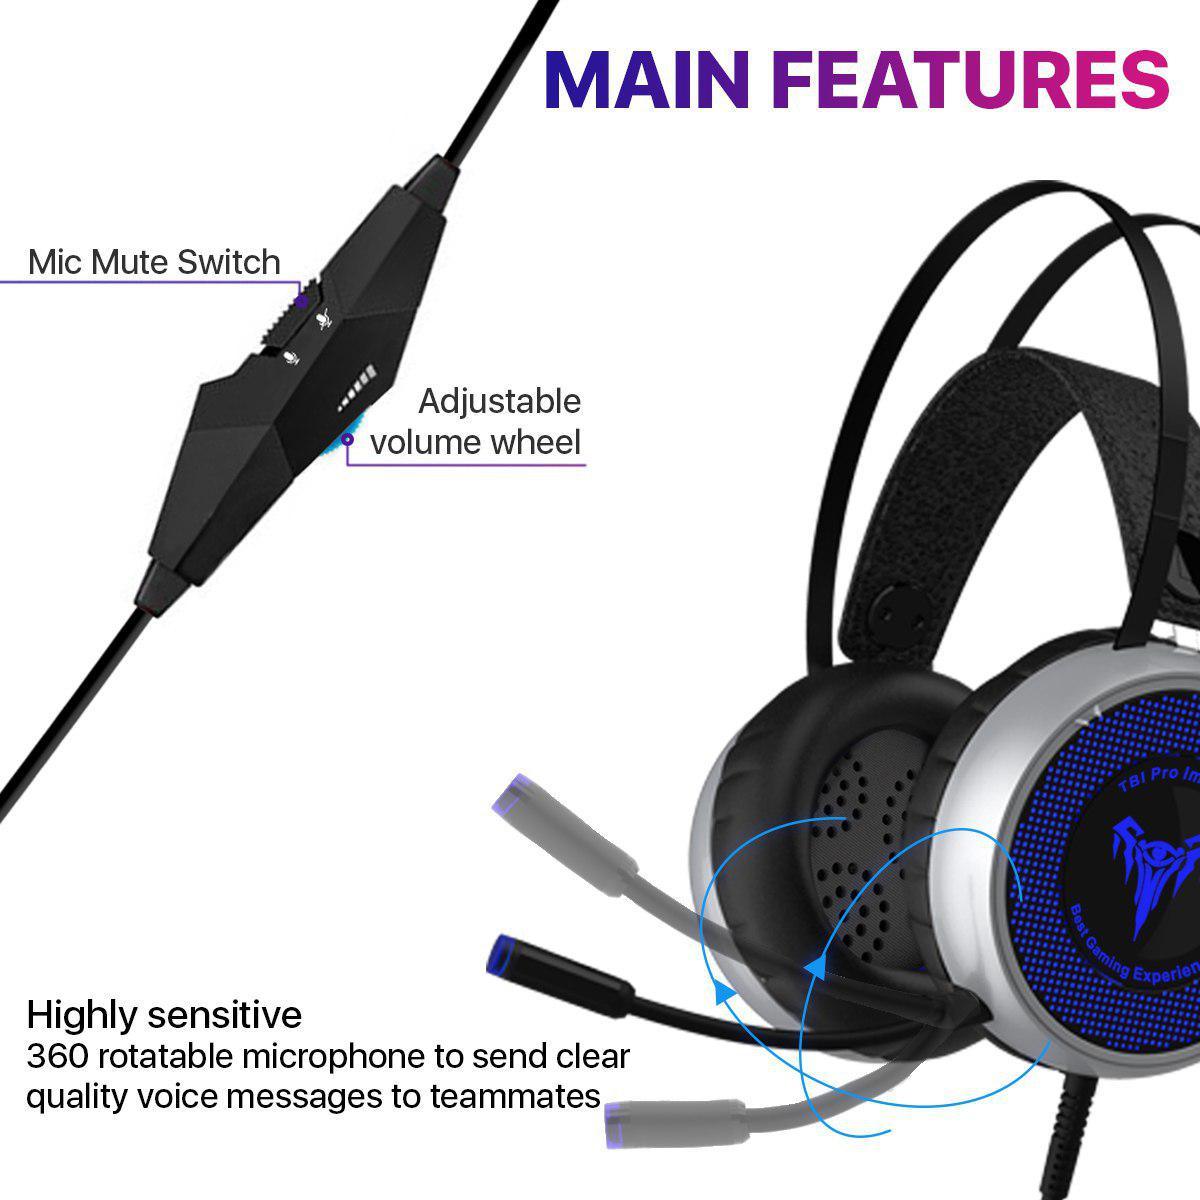 LazyGamer™ - Pro Gaming Headset V8 IMBA with 50MM High-End Dynamic, Comfy Earmuffs, LED, Adjustable Microphone, Mute and Volume Control for XboxOne, 360, S, PS3, PS4, PC, Nintendo, Laptop - Lazy Pro